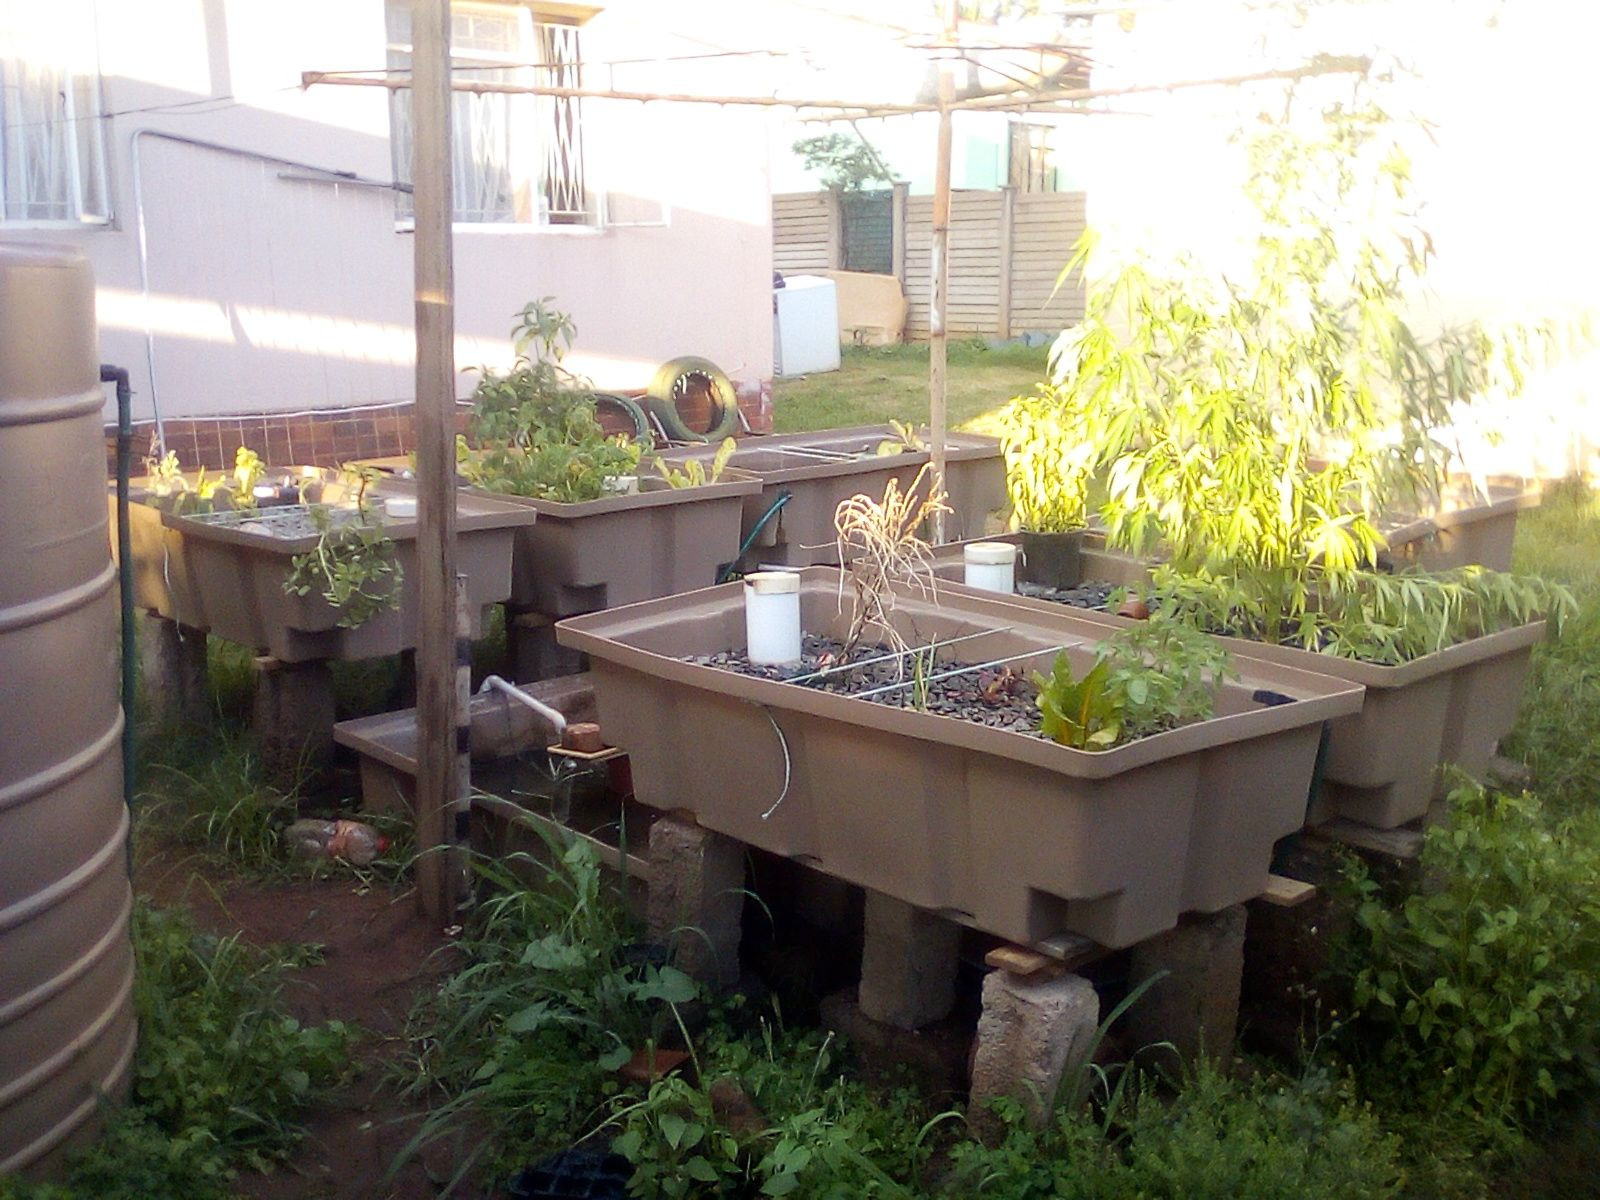 Aquaponics system fully complete and functional